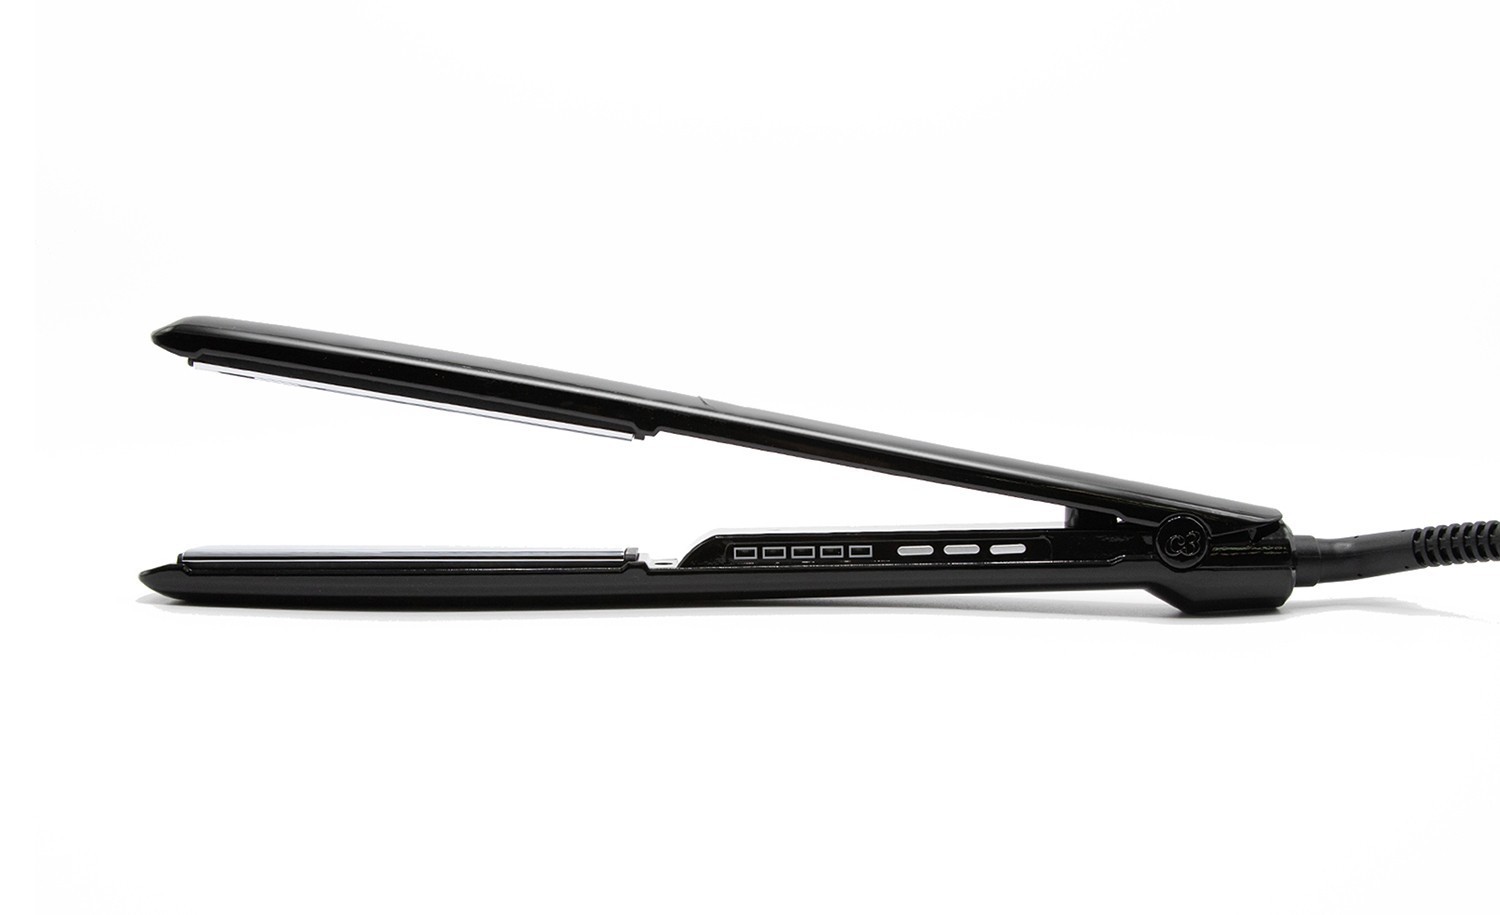 Corioliss® Official - Hair Straighteners